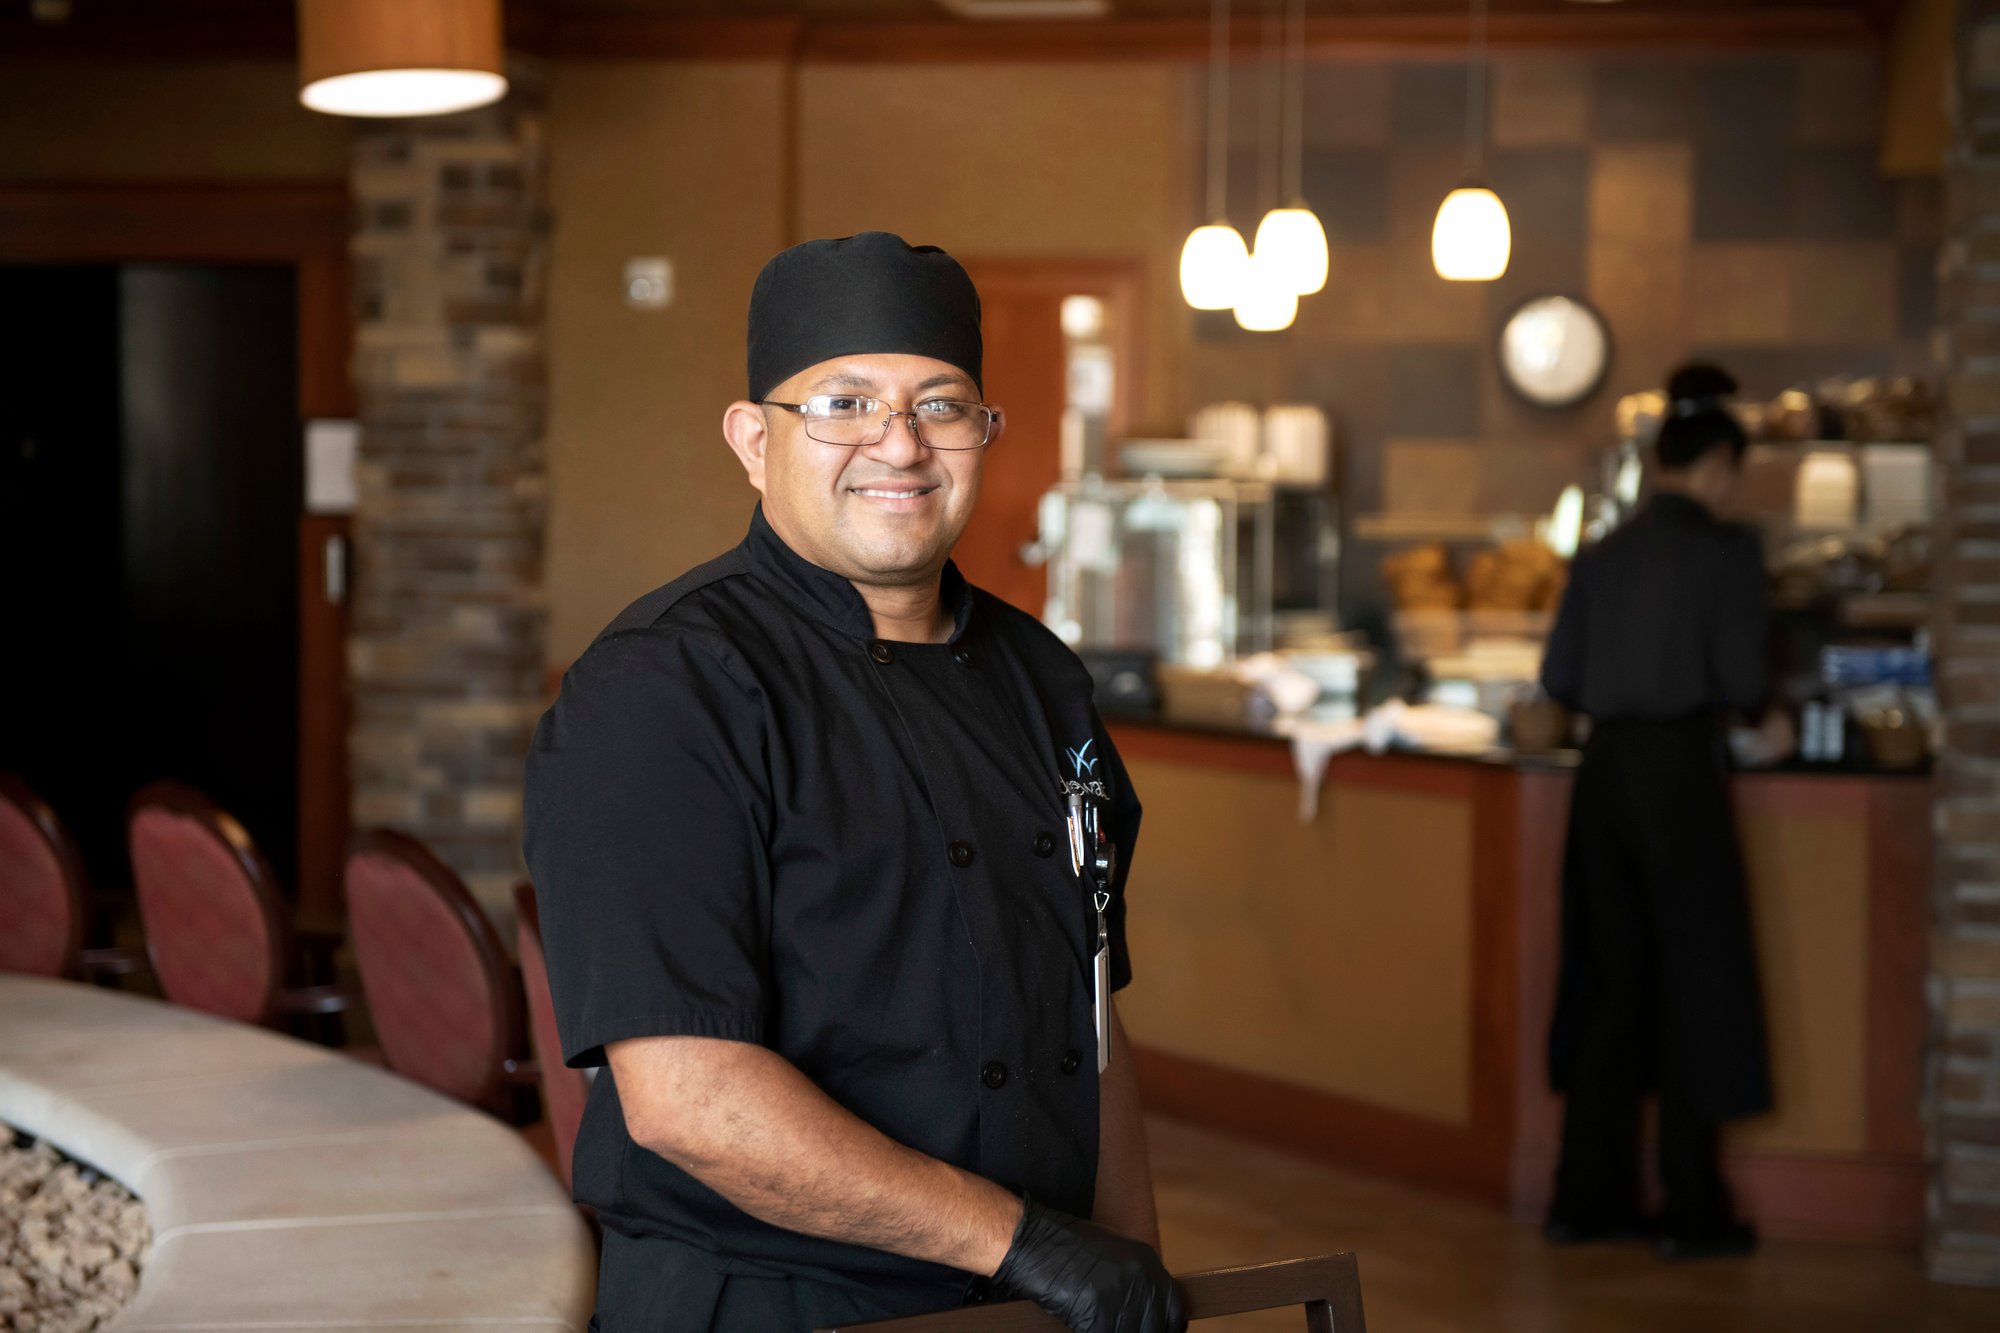 A chef smiling at the camera.